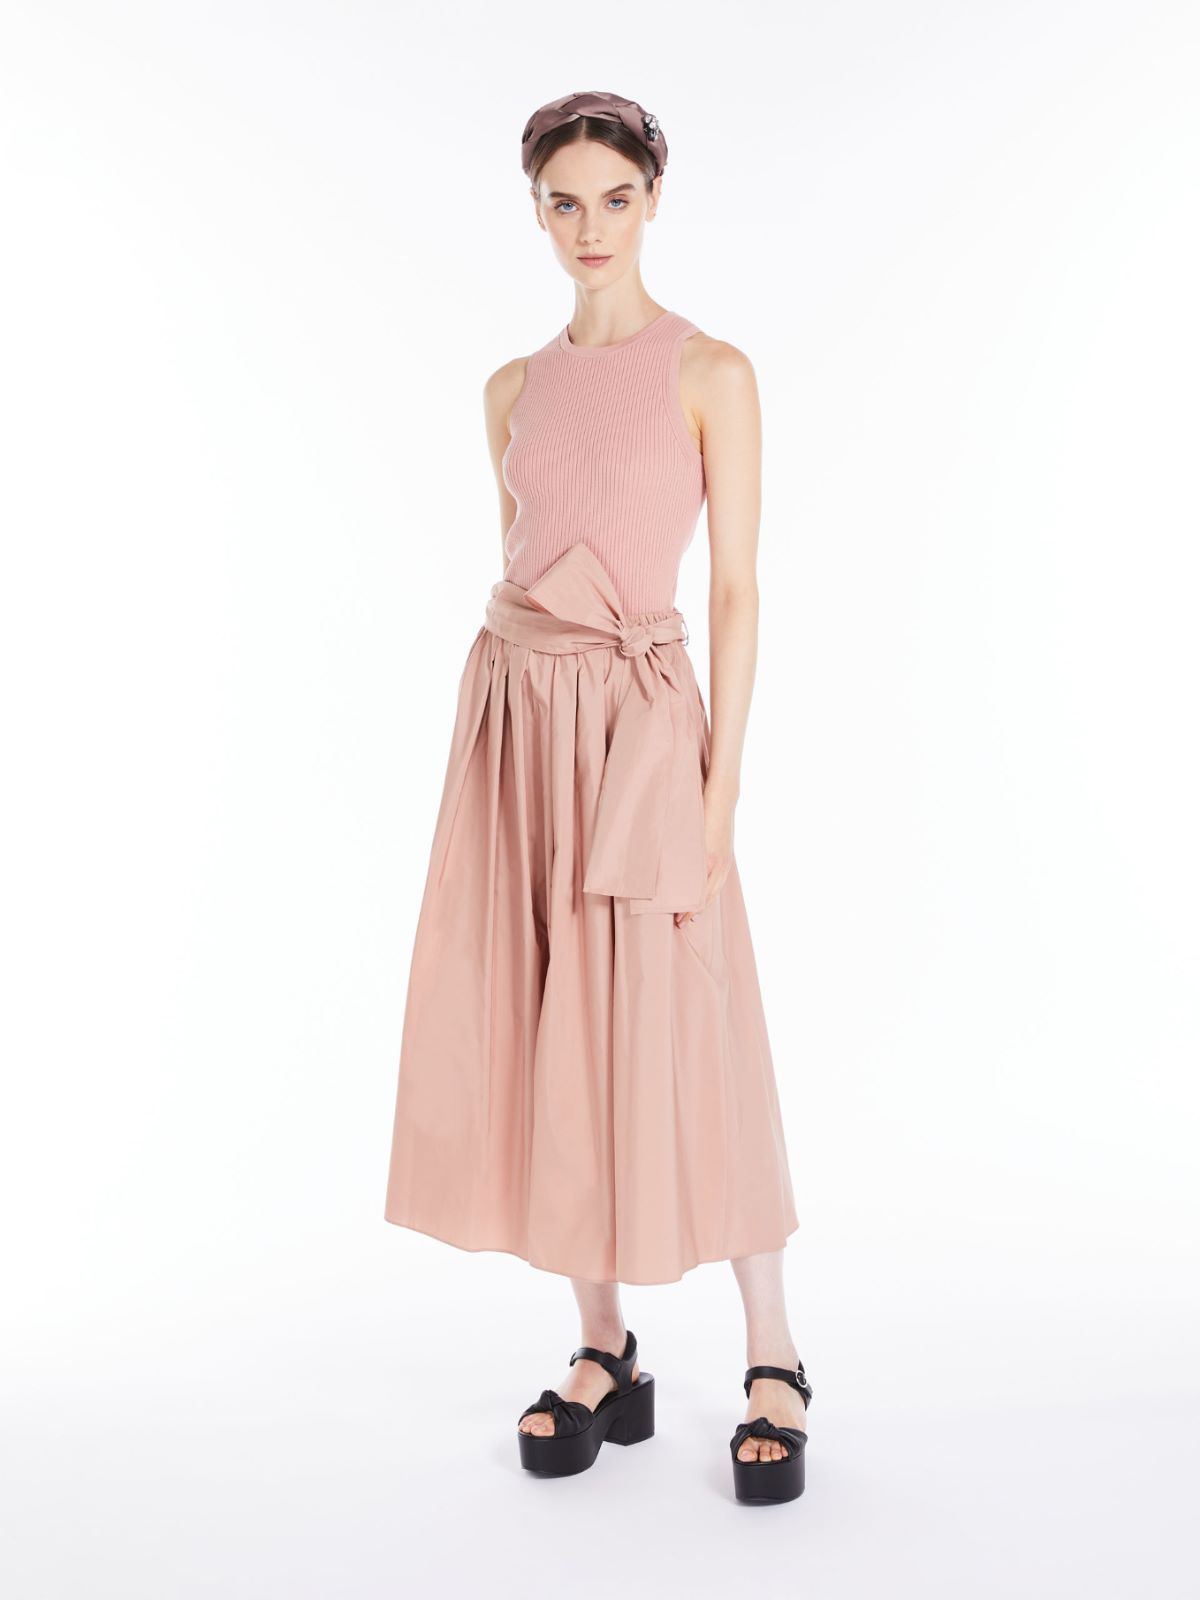 Ribbed top in stretch knit, peach | Weekend Max Mara